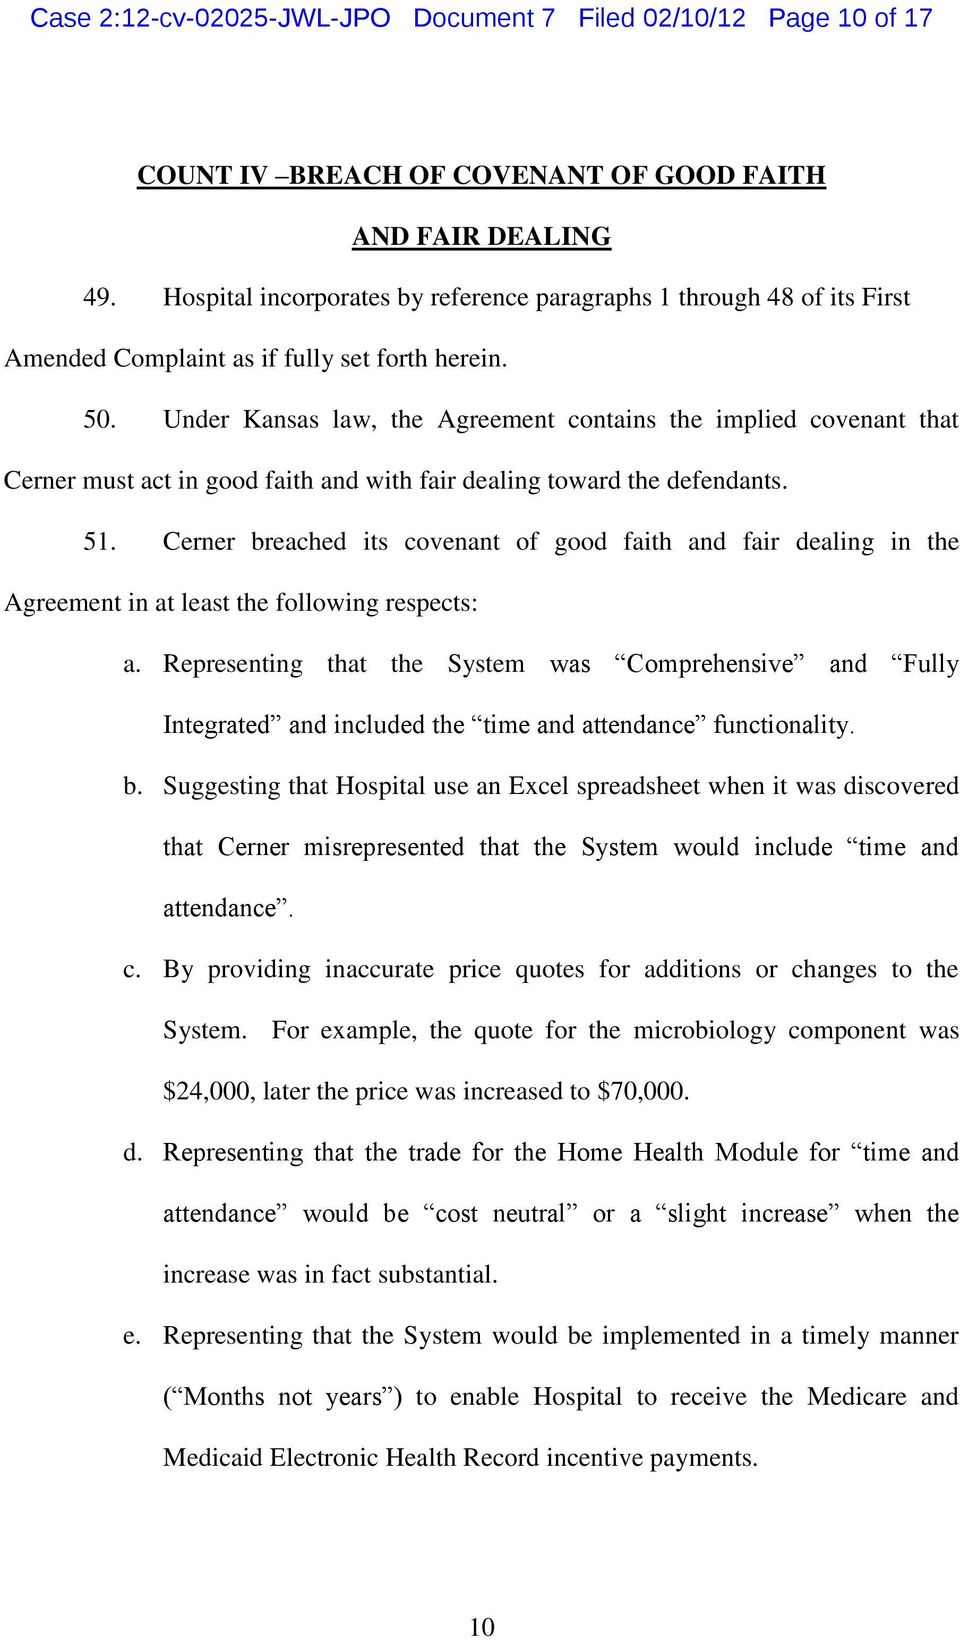 Under Kansas law, the Agreement contains the implied covenant that Cerner must act in good faith and with fair dealing toward the defendants. 51.